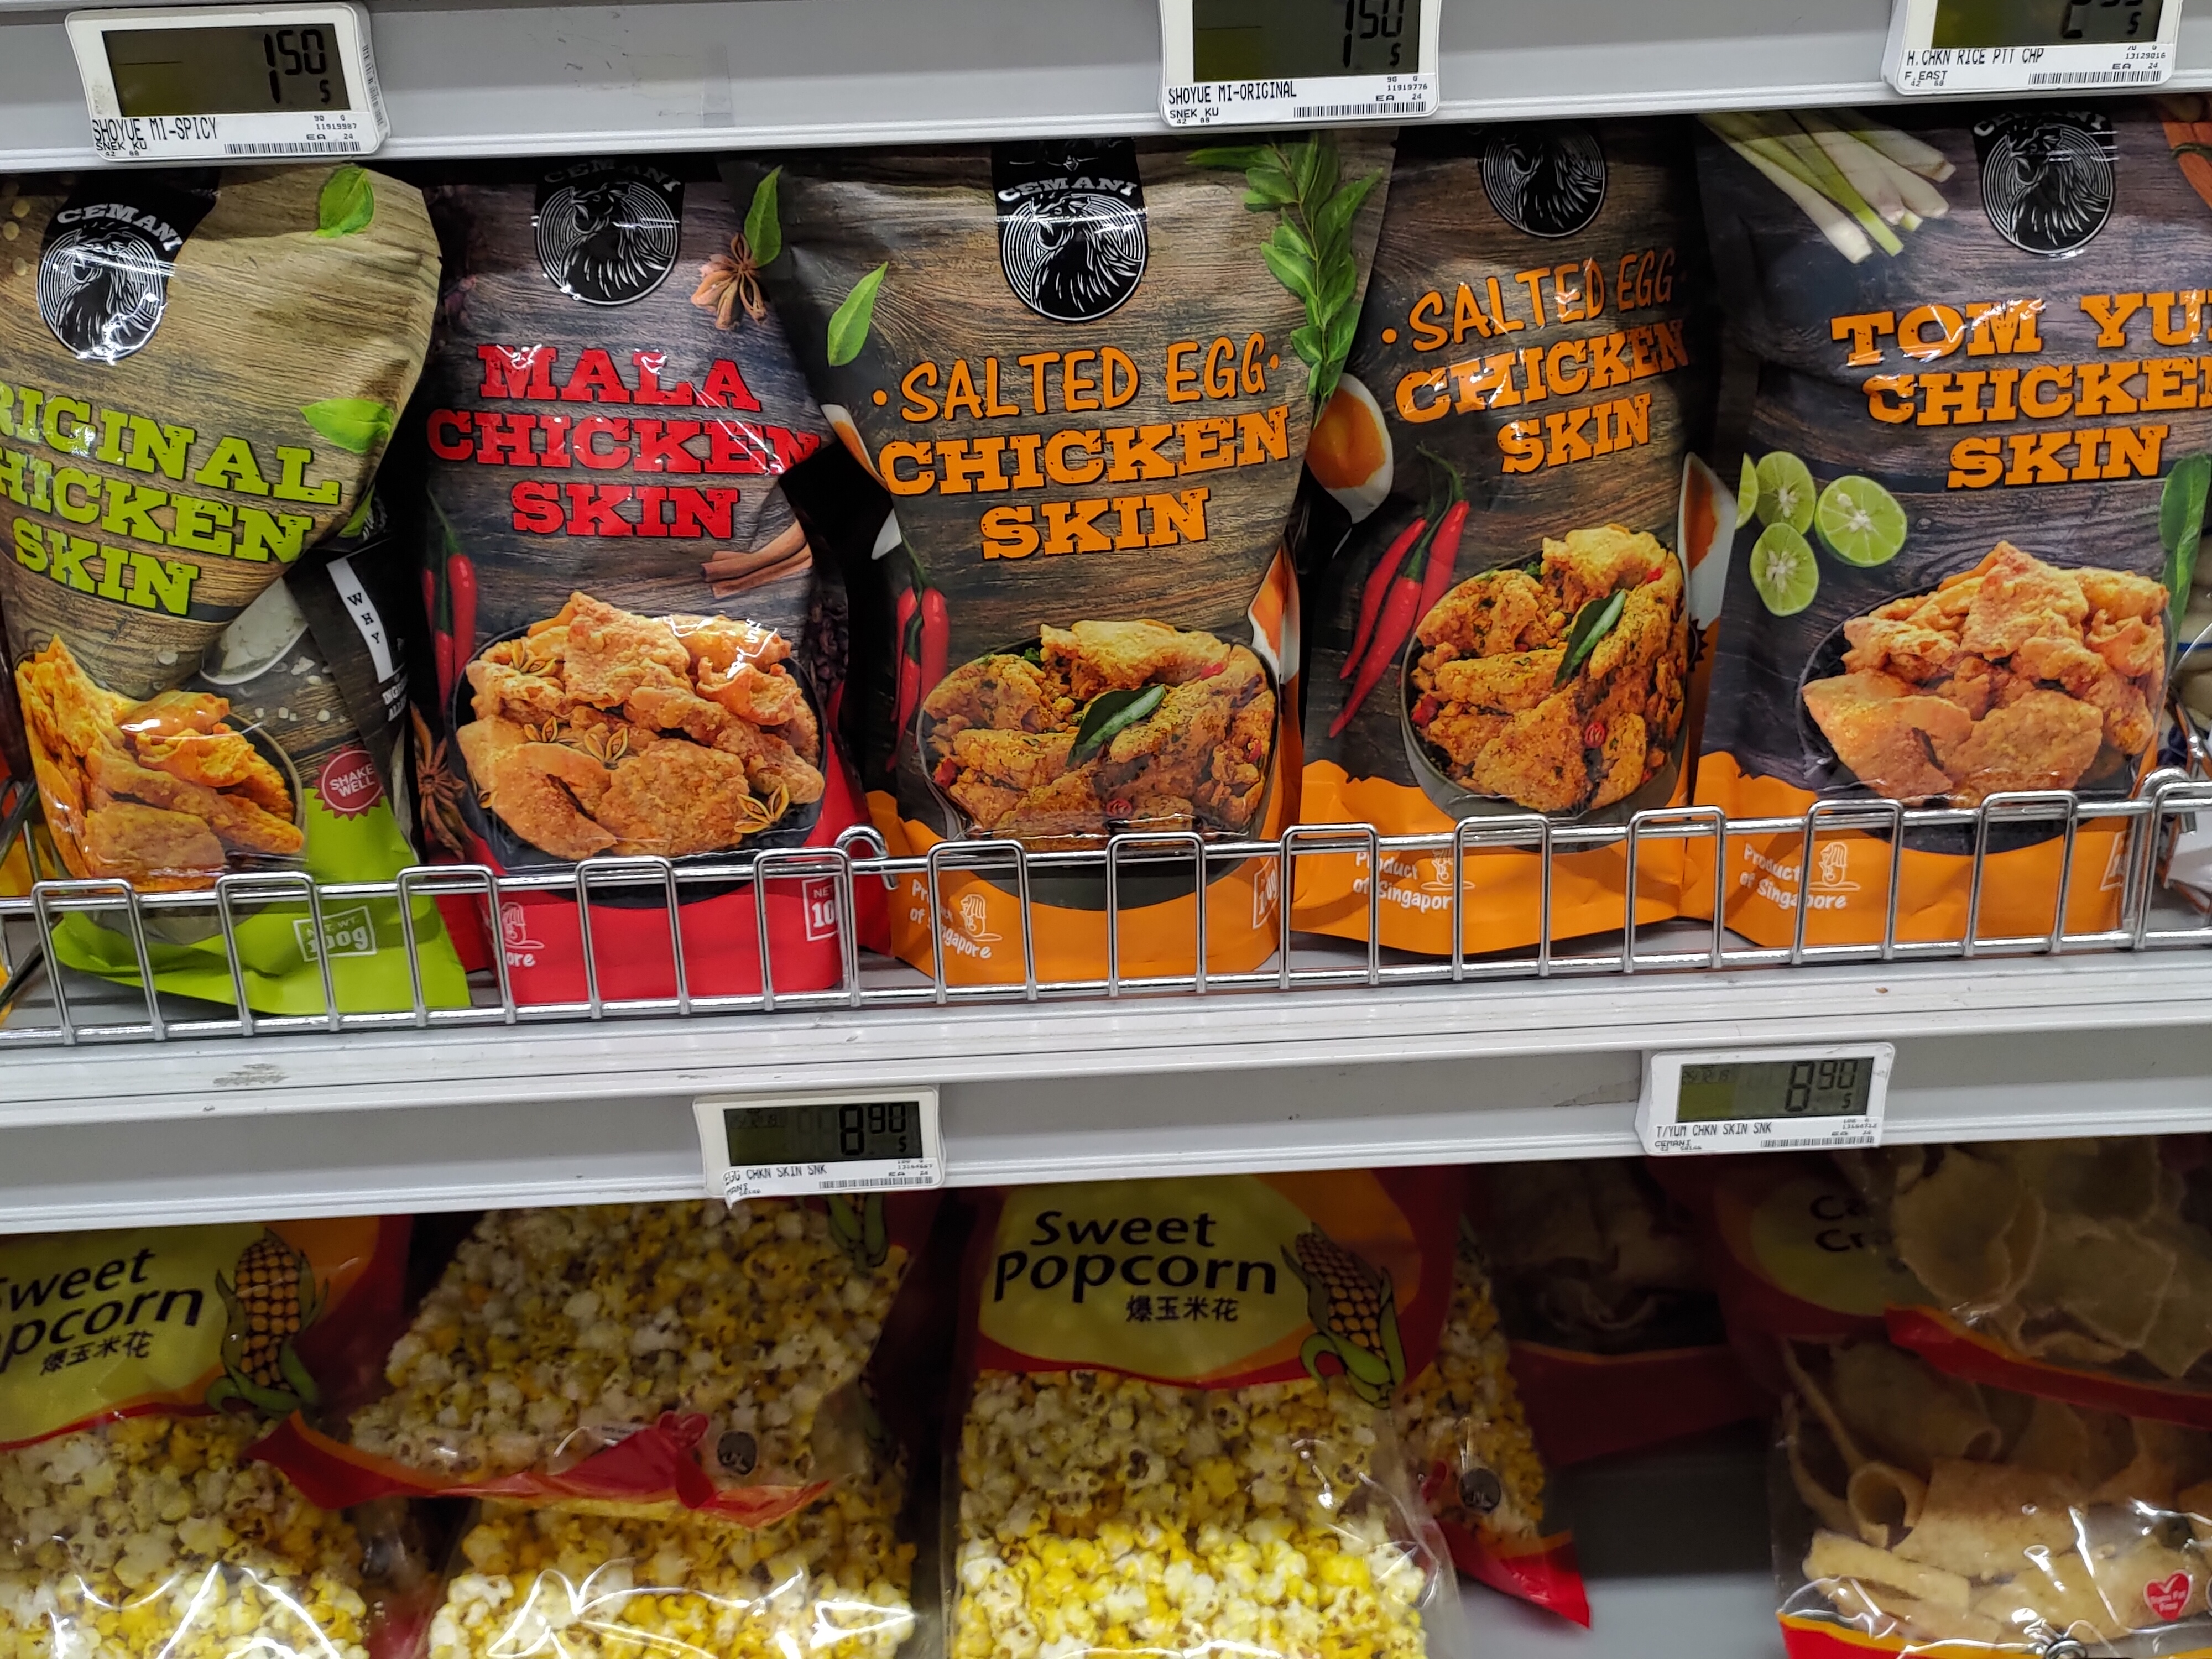 New Chicken Skin Snacks With Mala, Salted Egg and Tom Yum flavours are now found at FairPrice - 1